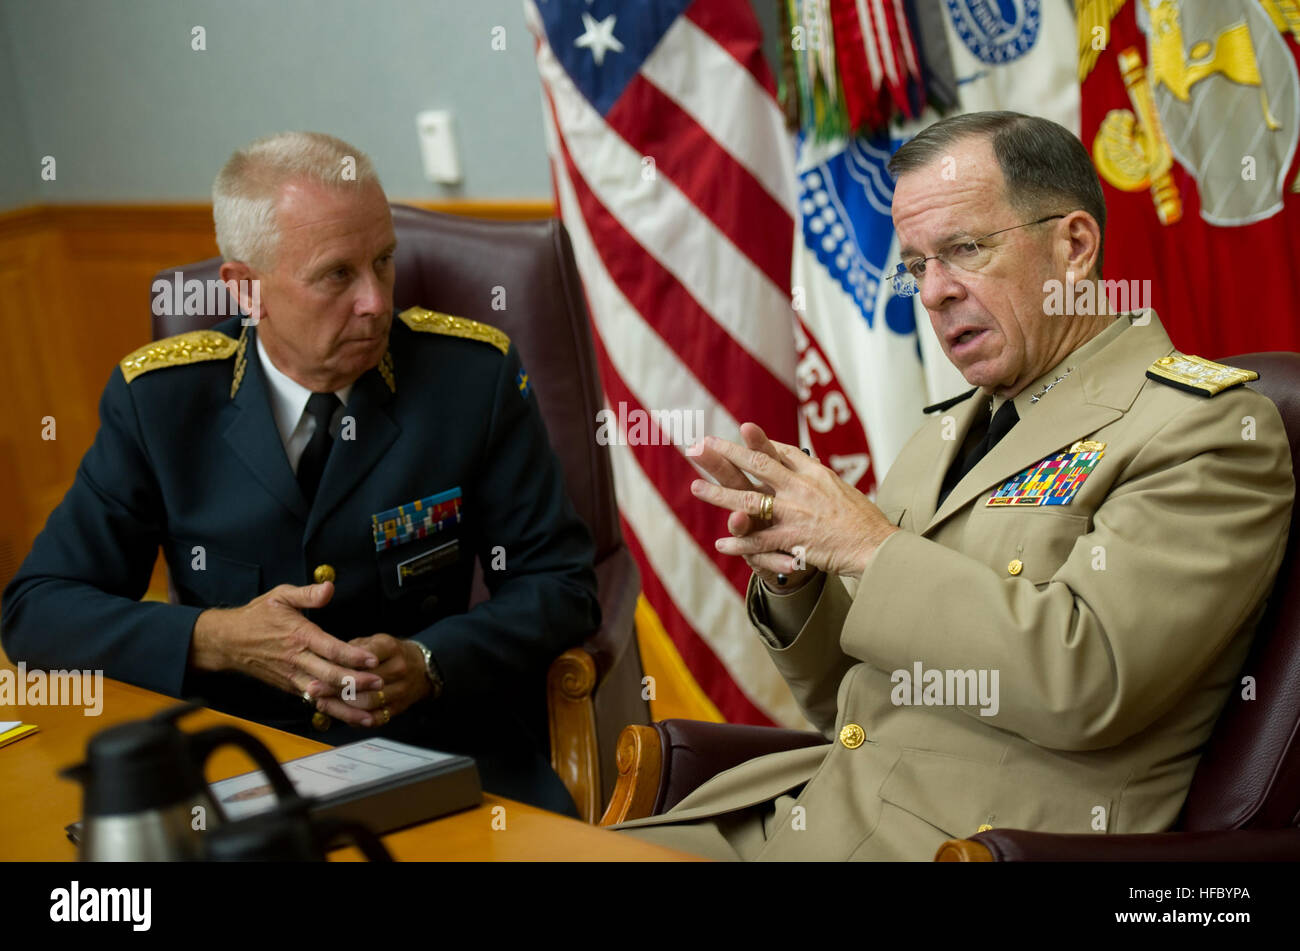 100805-N-0696M-062        Chairman of the Joint Chiefs of Staff Adm. Mike Mullen, U.S. Navy, and Supreme Commander of the Swedish Armed Forces Gen. Sverker Goranson meet in 'The Tank', the Joint Chiefs of Staff secure conference room in the Pentagon on August 5, 2010.  DoD photo by Petty Officer 1st Class Chad J. McNeeley, U.S. Navy.  (Released) G%%%%%%%%C3%%%%%%%%B6ranson and Mullen in the Tank Stock Photo